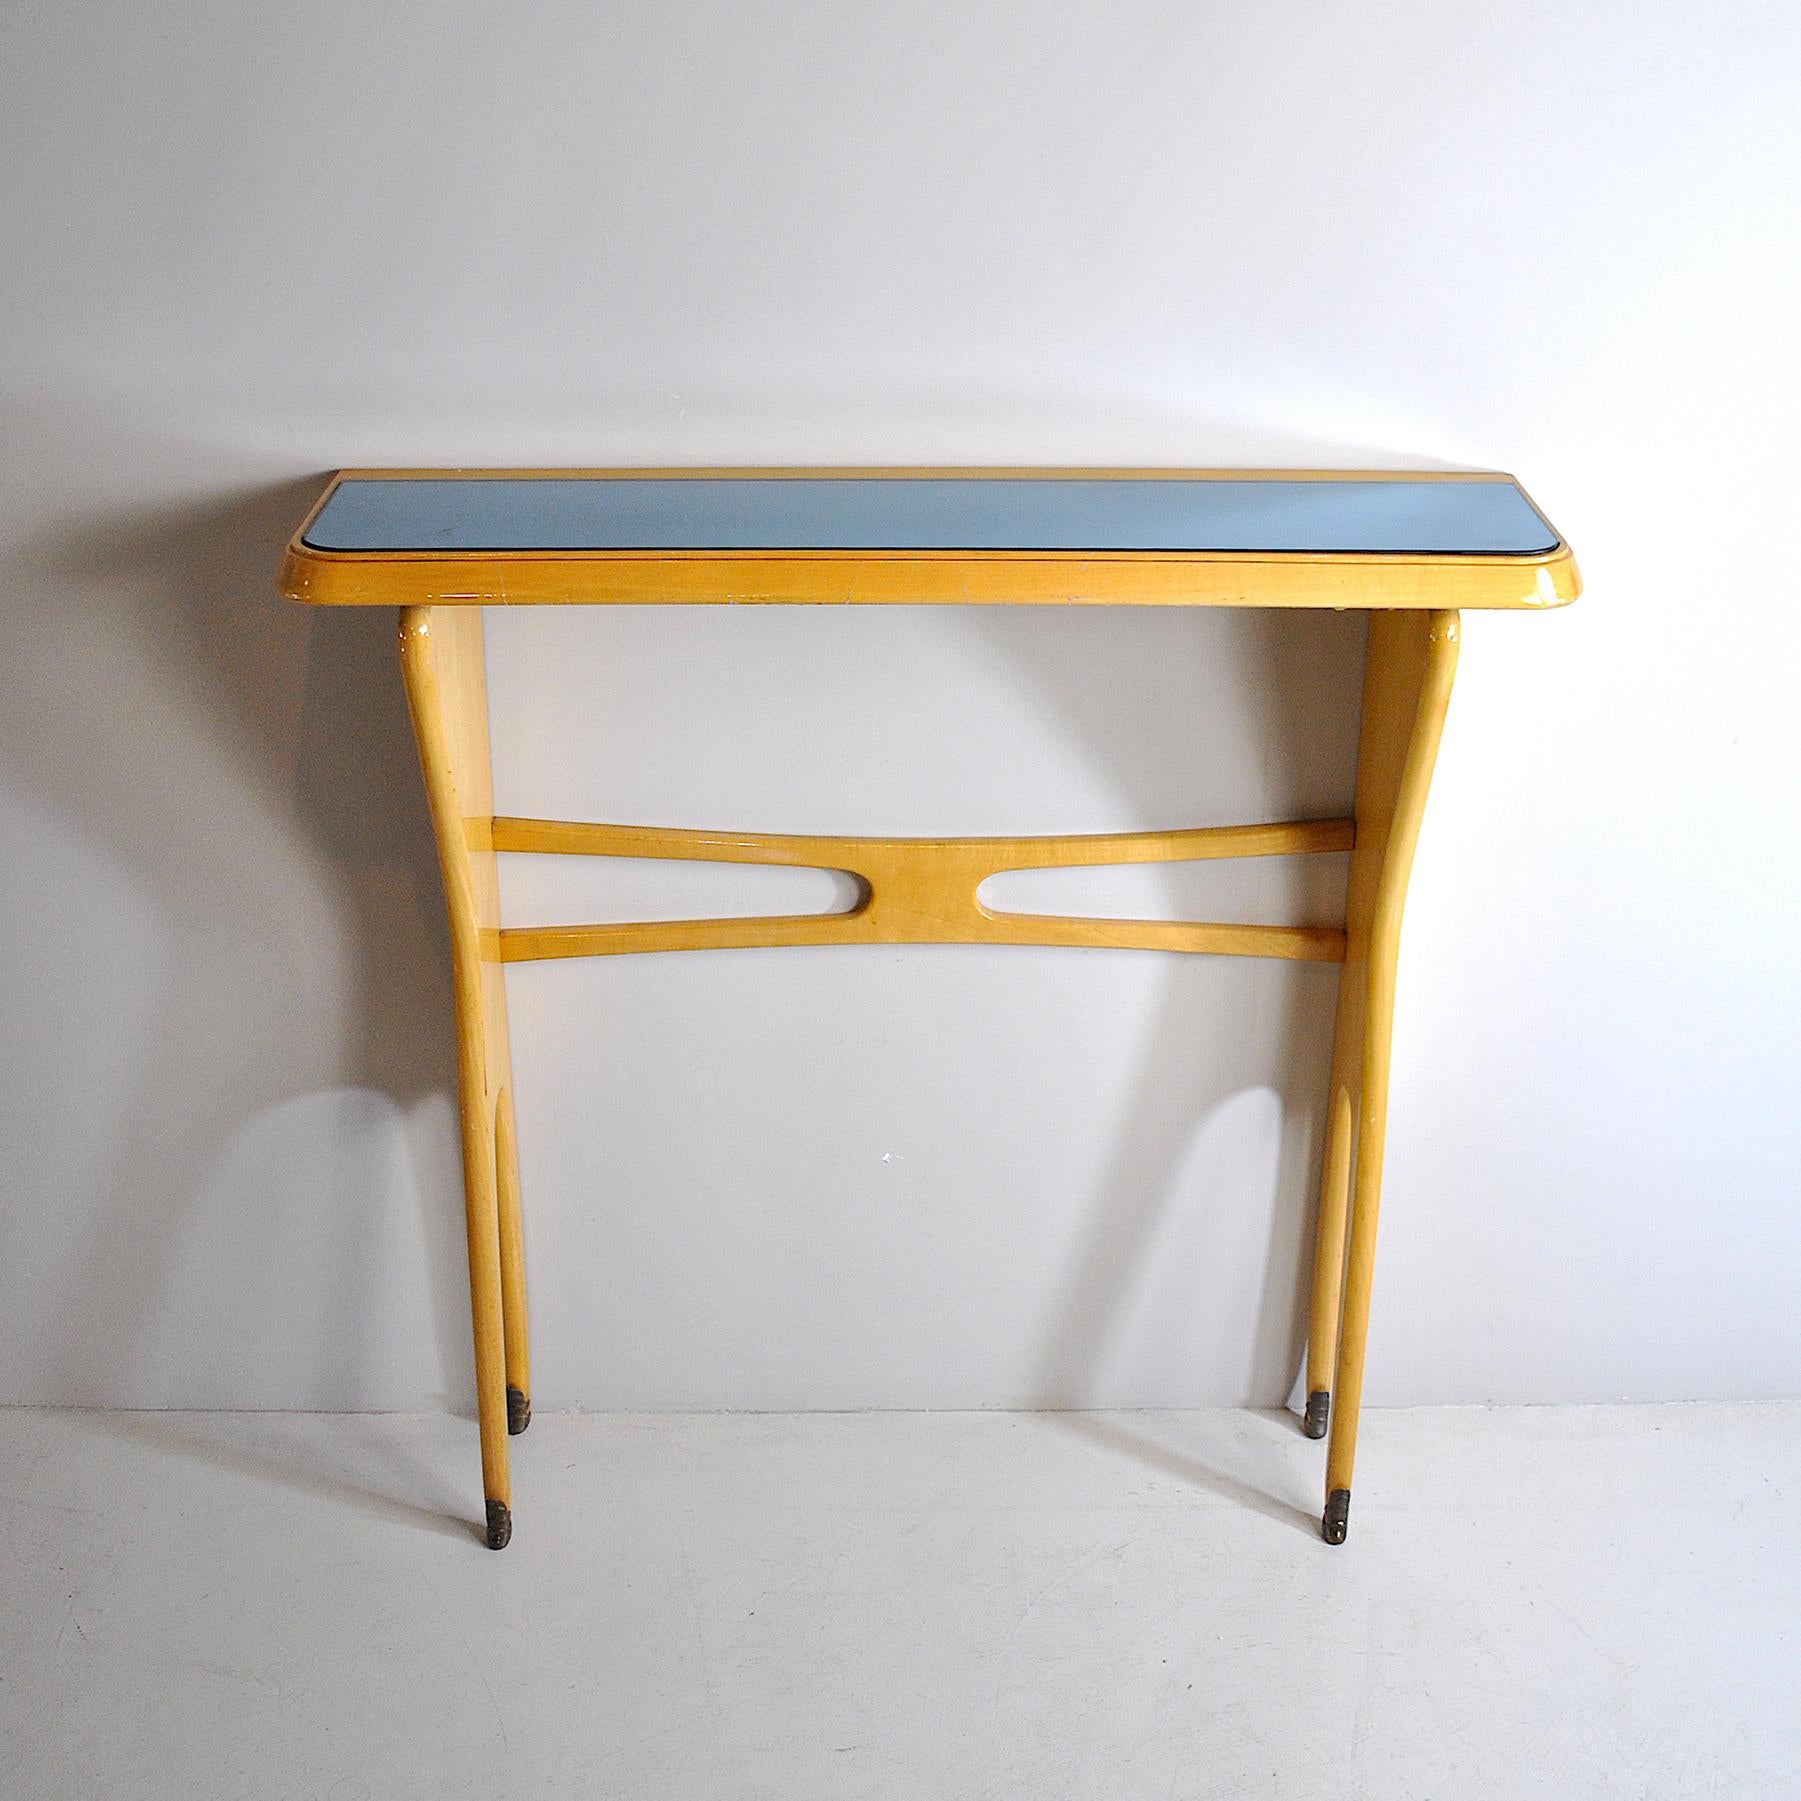 Console made in Italy from the 1950s in light wood and colored glass.